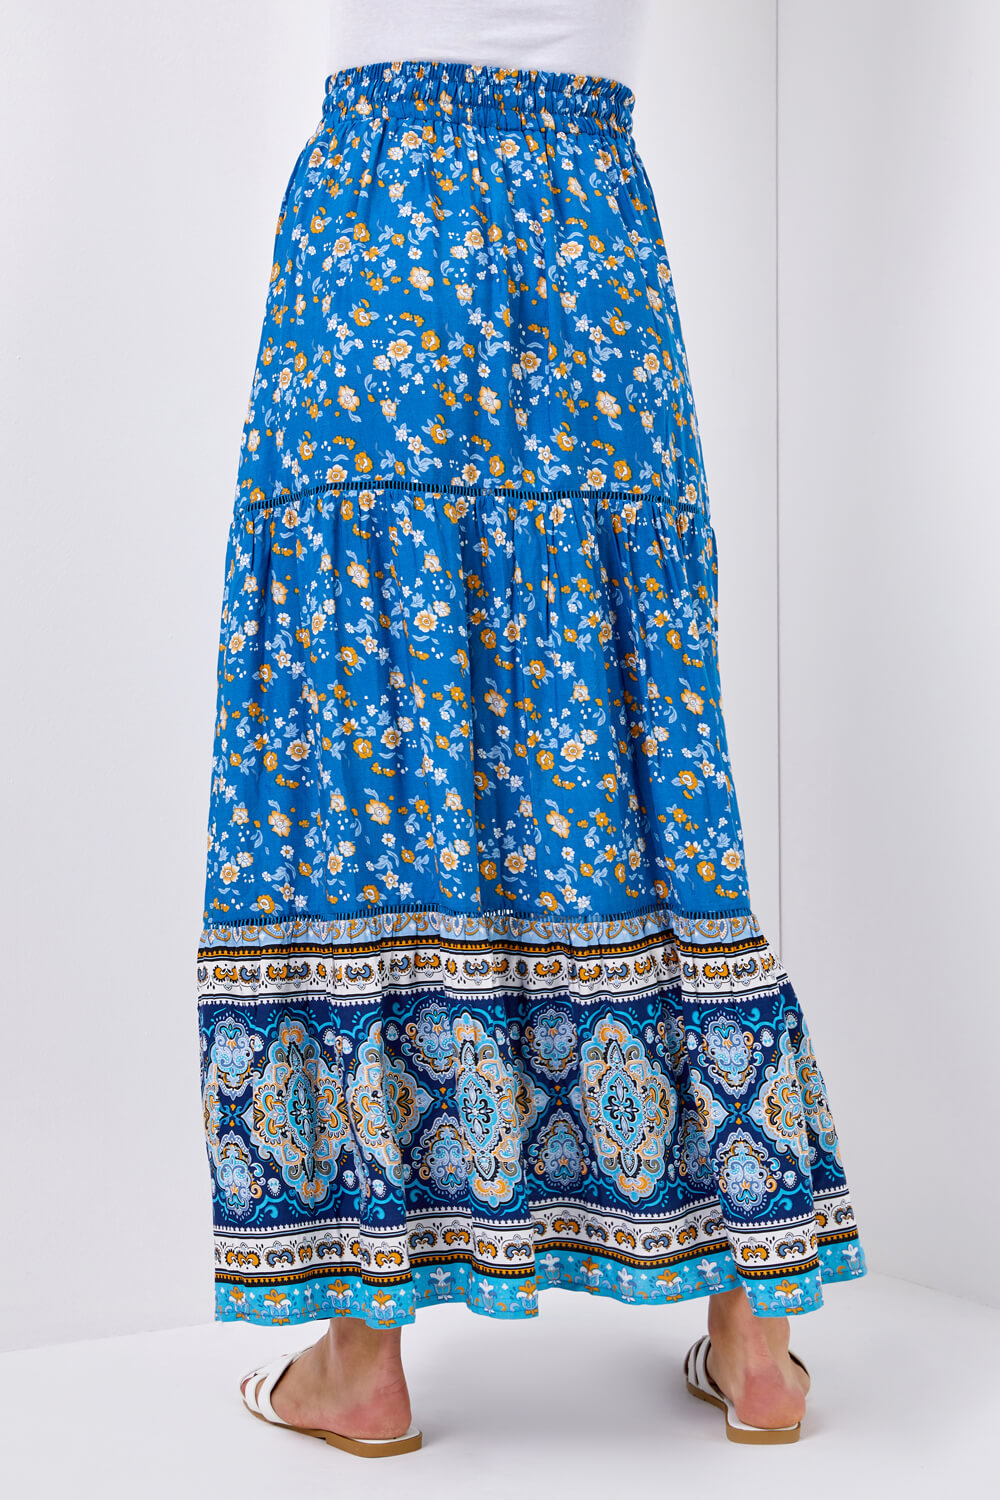 Blue Tiered Floral Print Maxi Skirt, Image 2 of 4